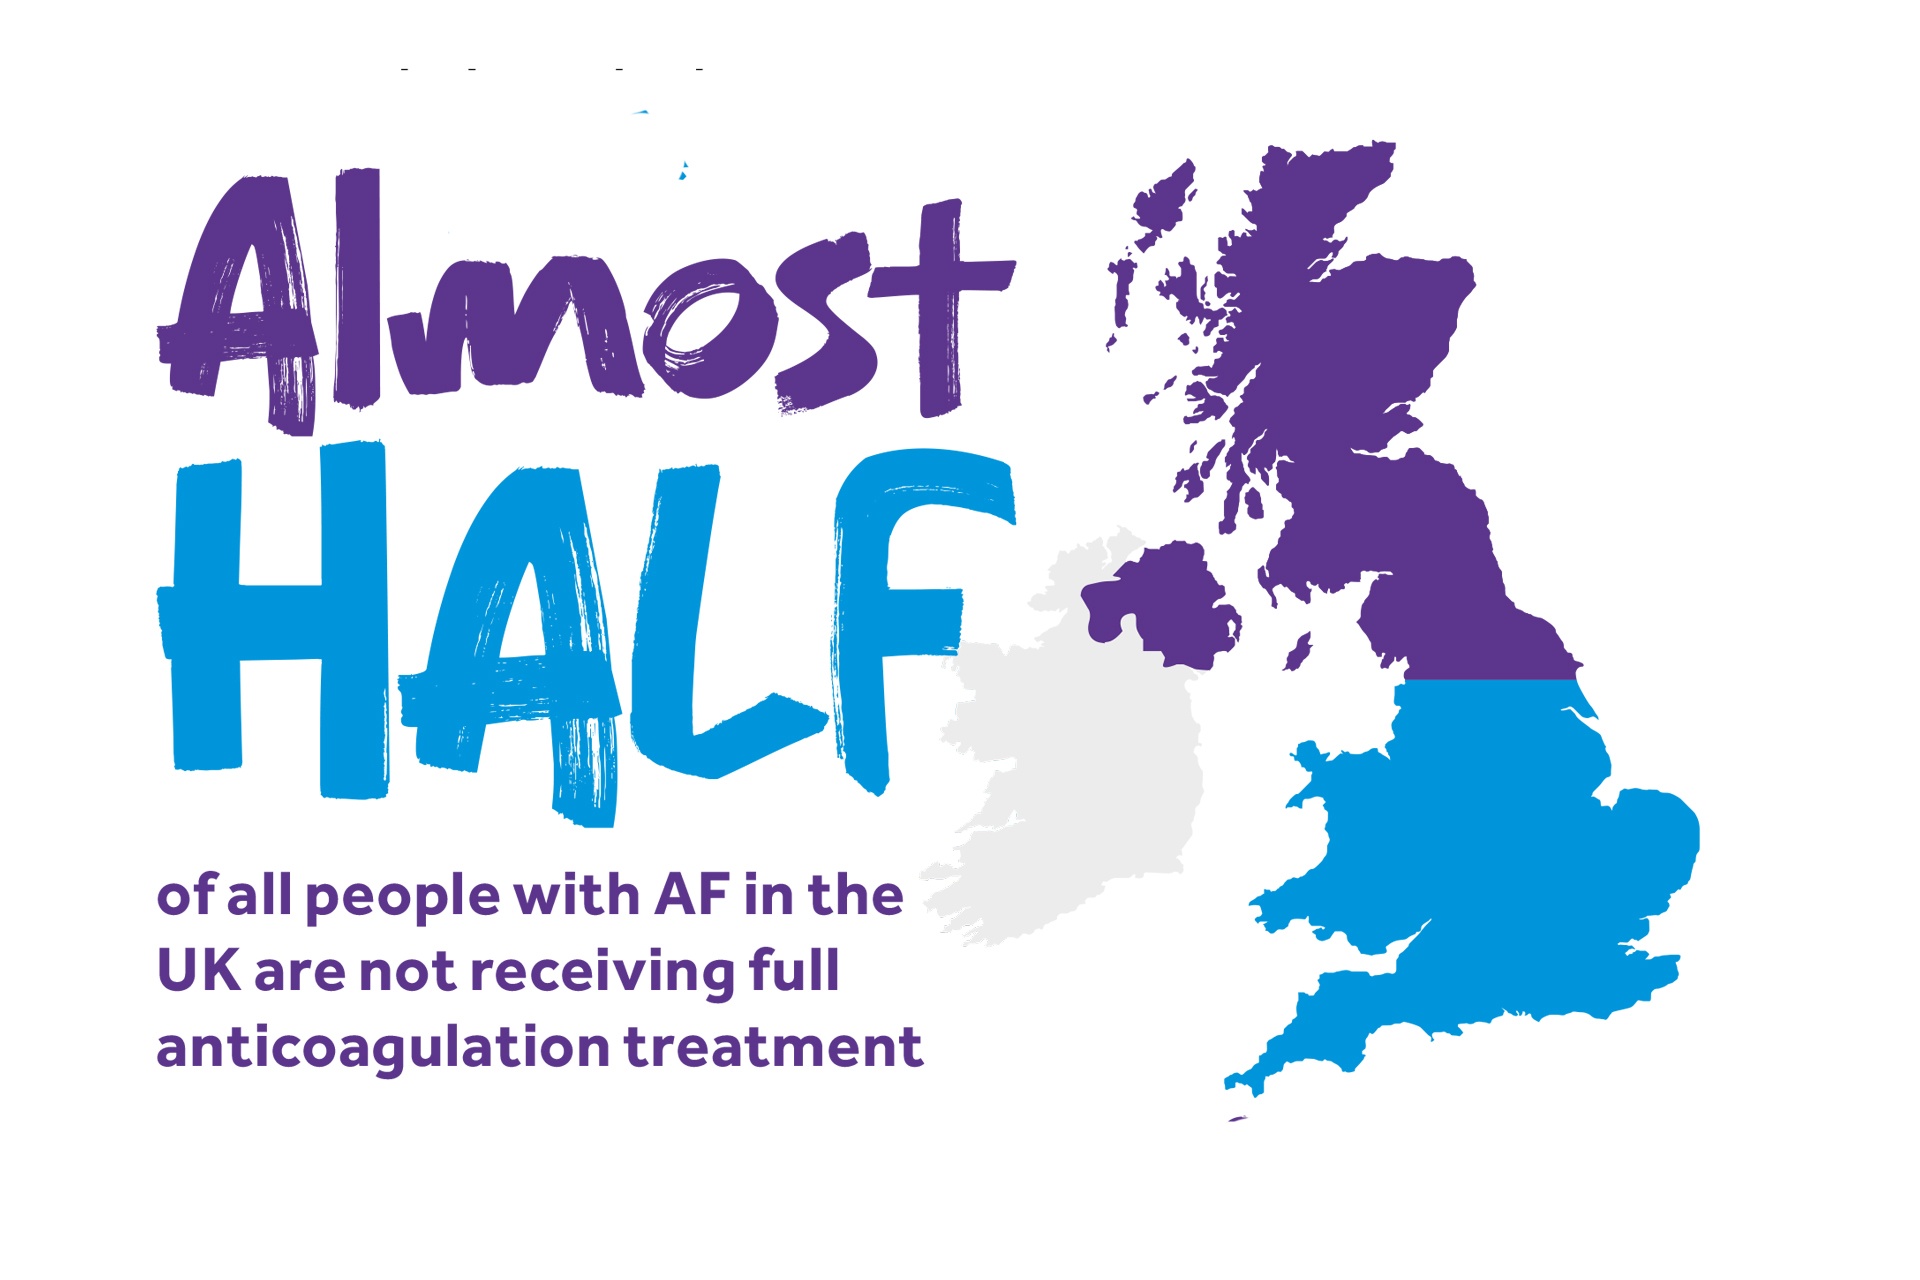 Large statistic. Almost half of the UK population are at risk of Atrial Fibrillation.